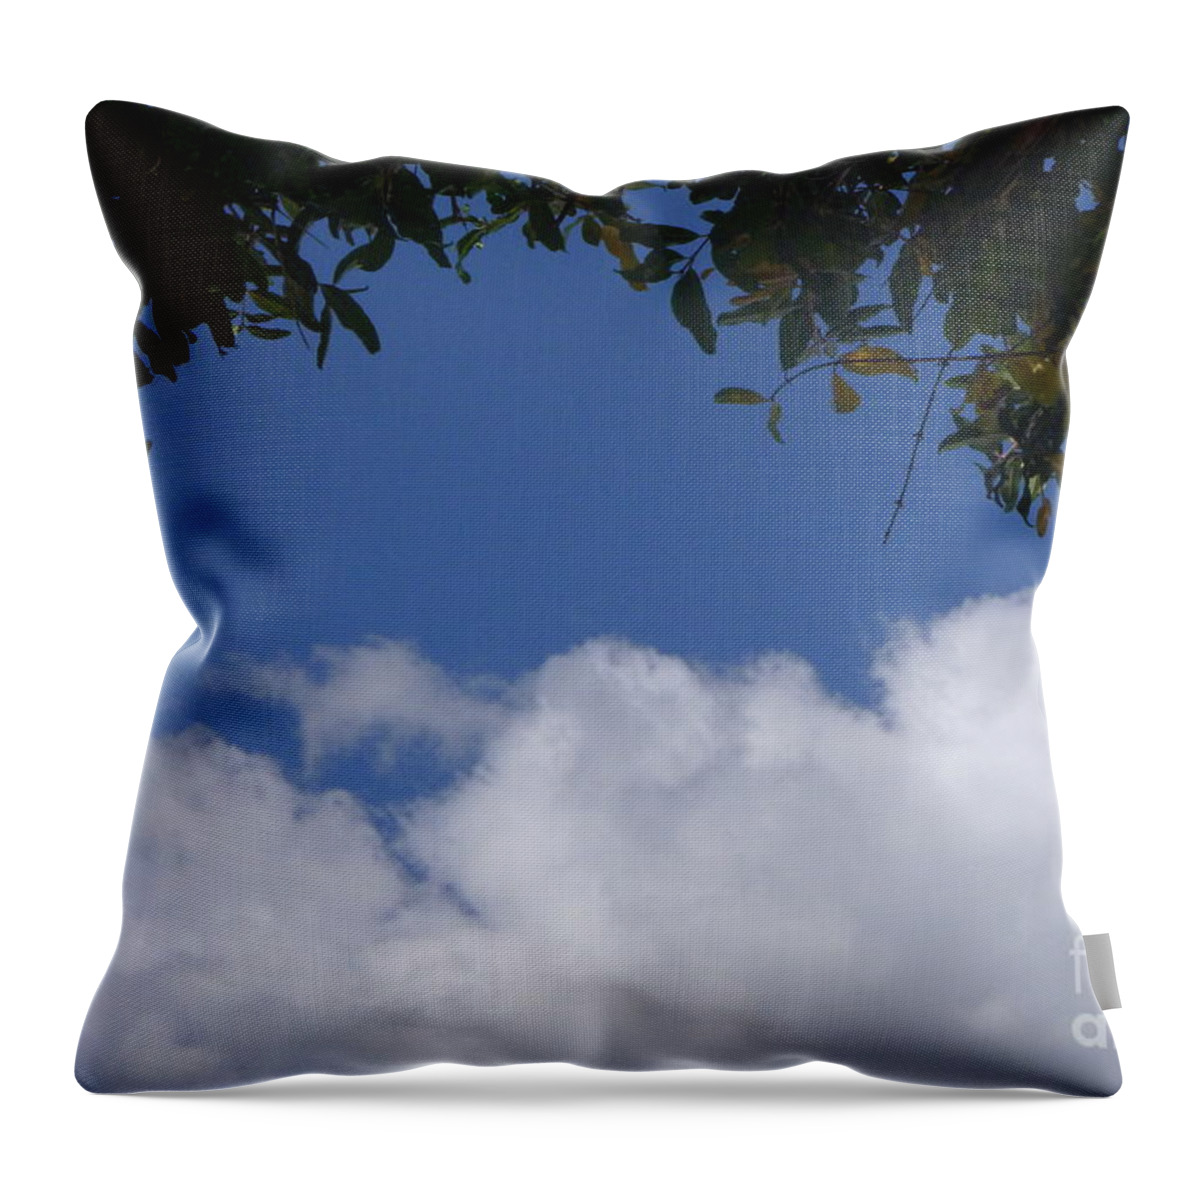 Clouds Throw Pillow featuring the photograph Clouds Framed by Tree by Nora Boghossian